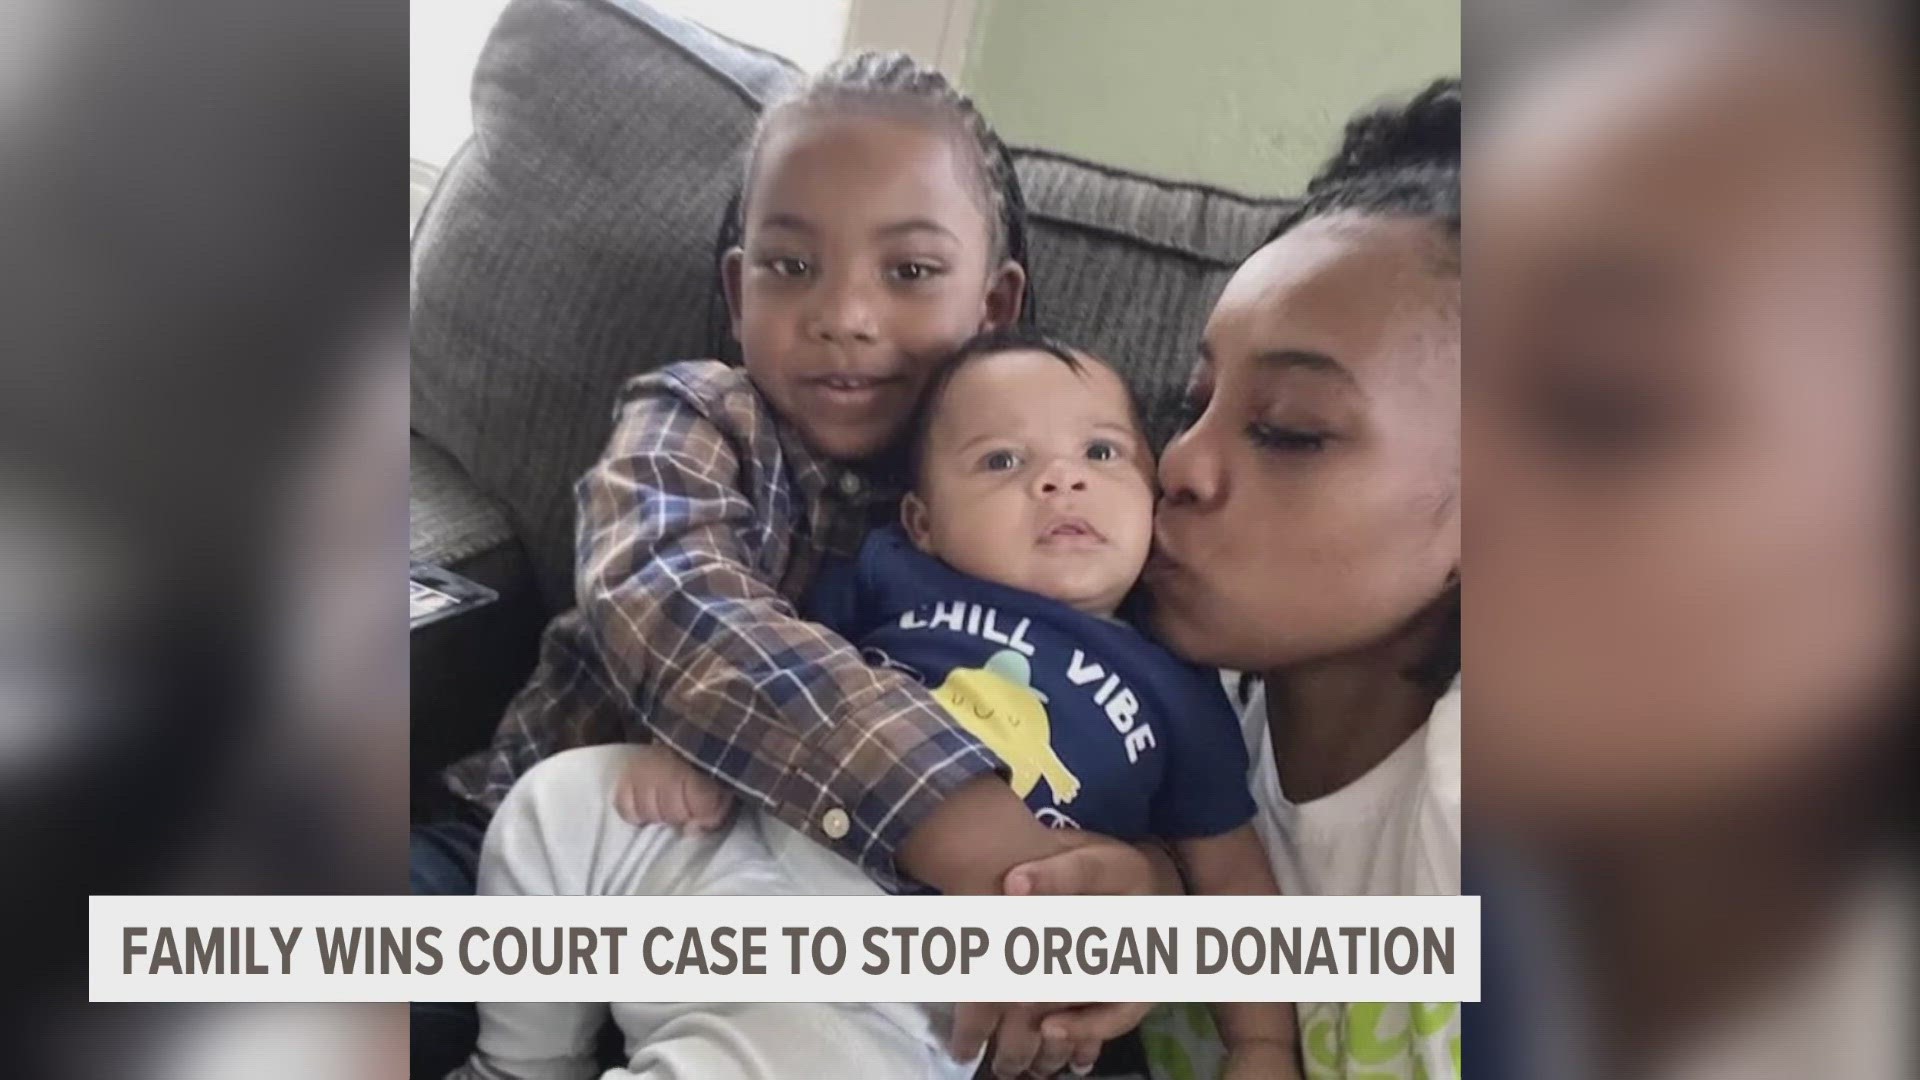 Utah families connected by loss raise funds, awareness for organ donation